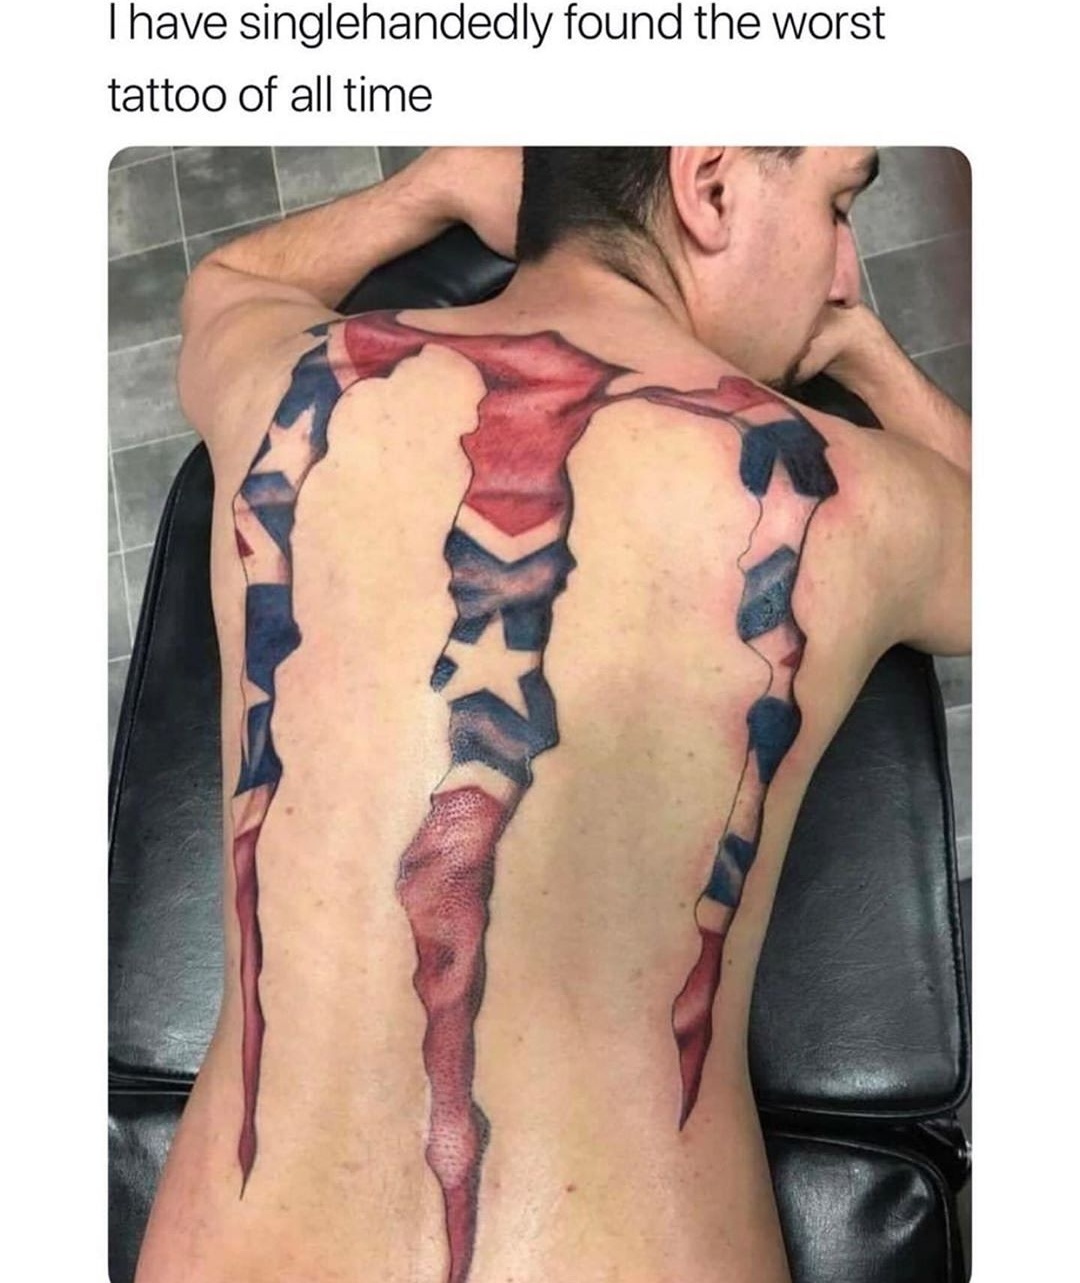 kyle save some cousins for the rest - Thave singlehandedly found the worst tattoo of all time